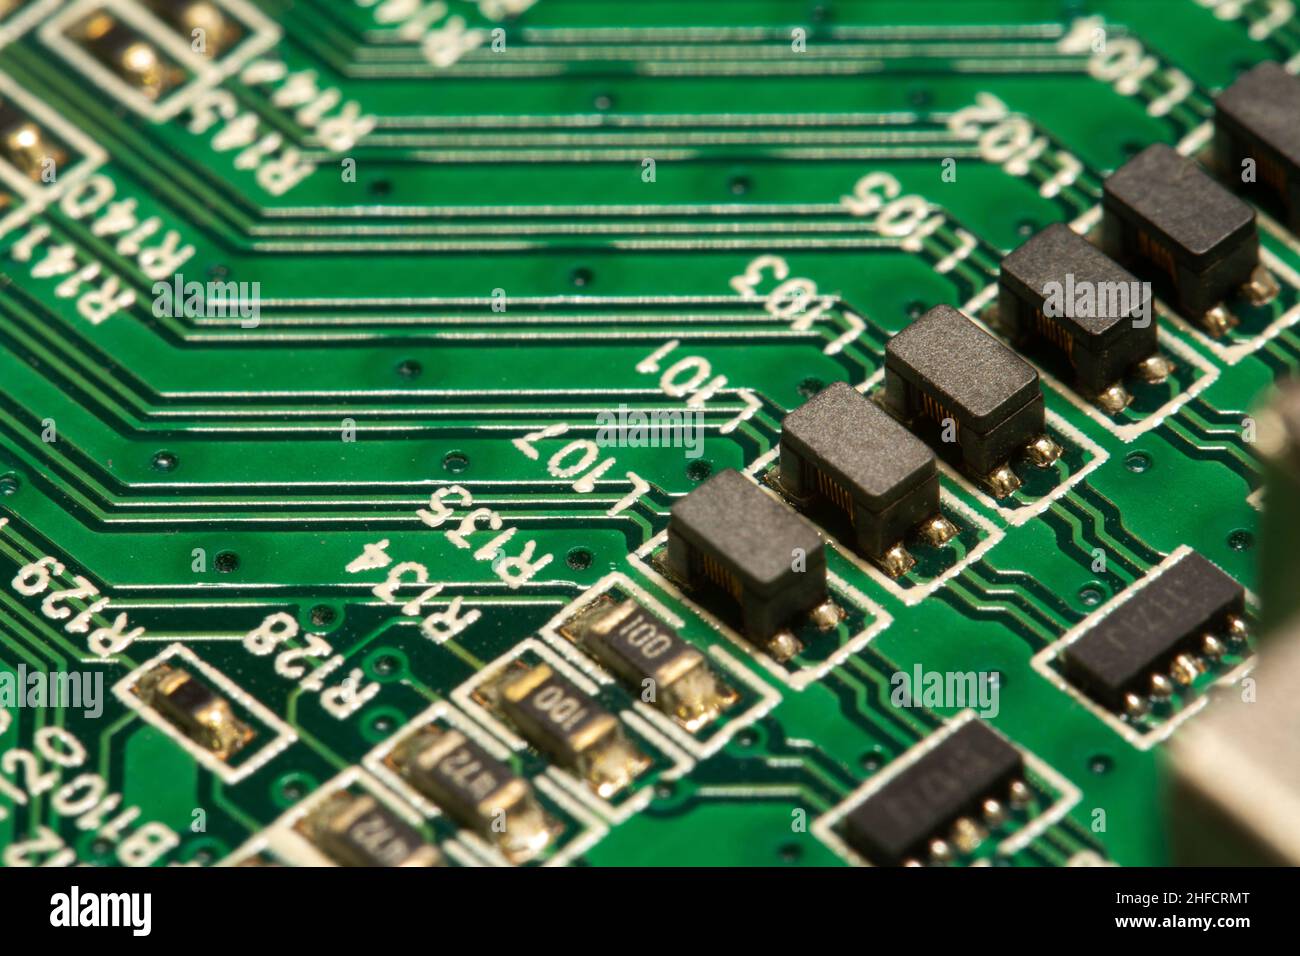 SMD components soldered on a green printed circuit board (PCB). Stock Photo